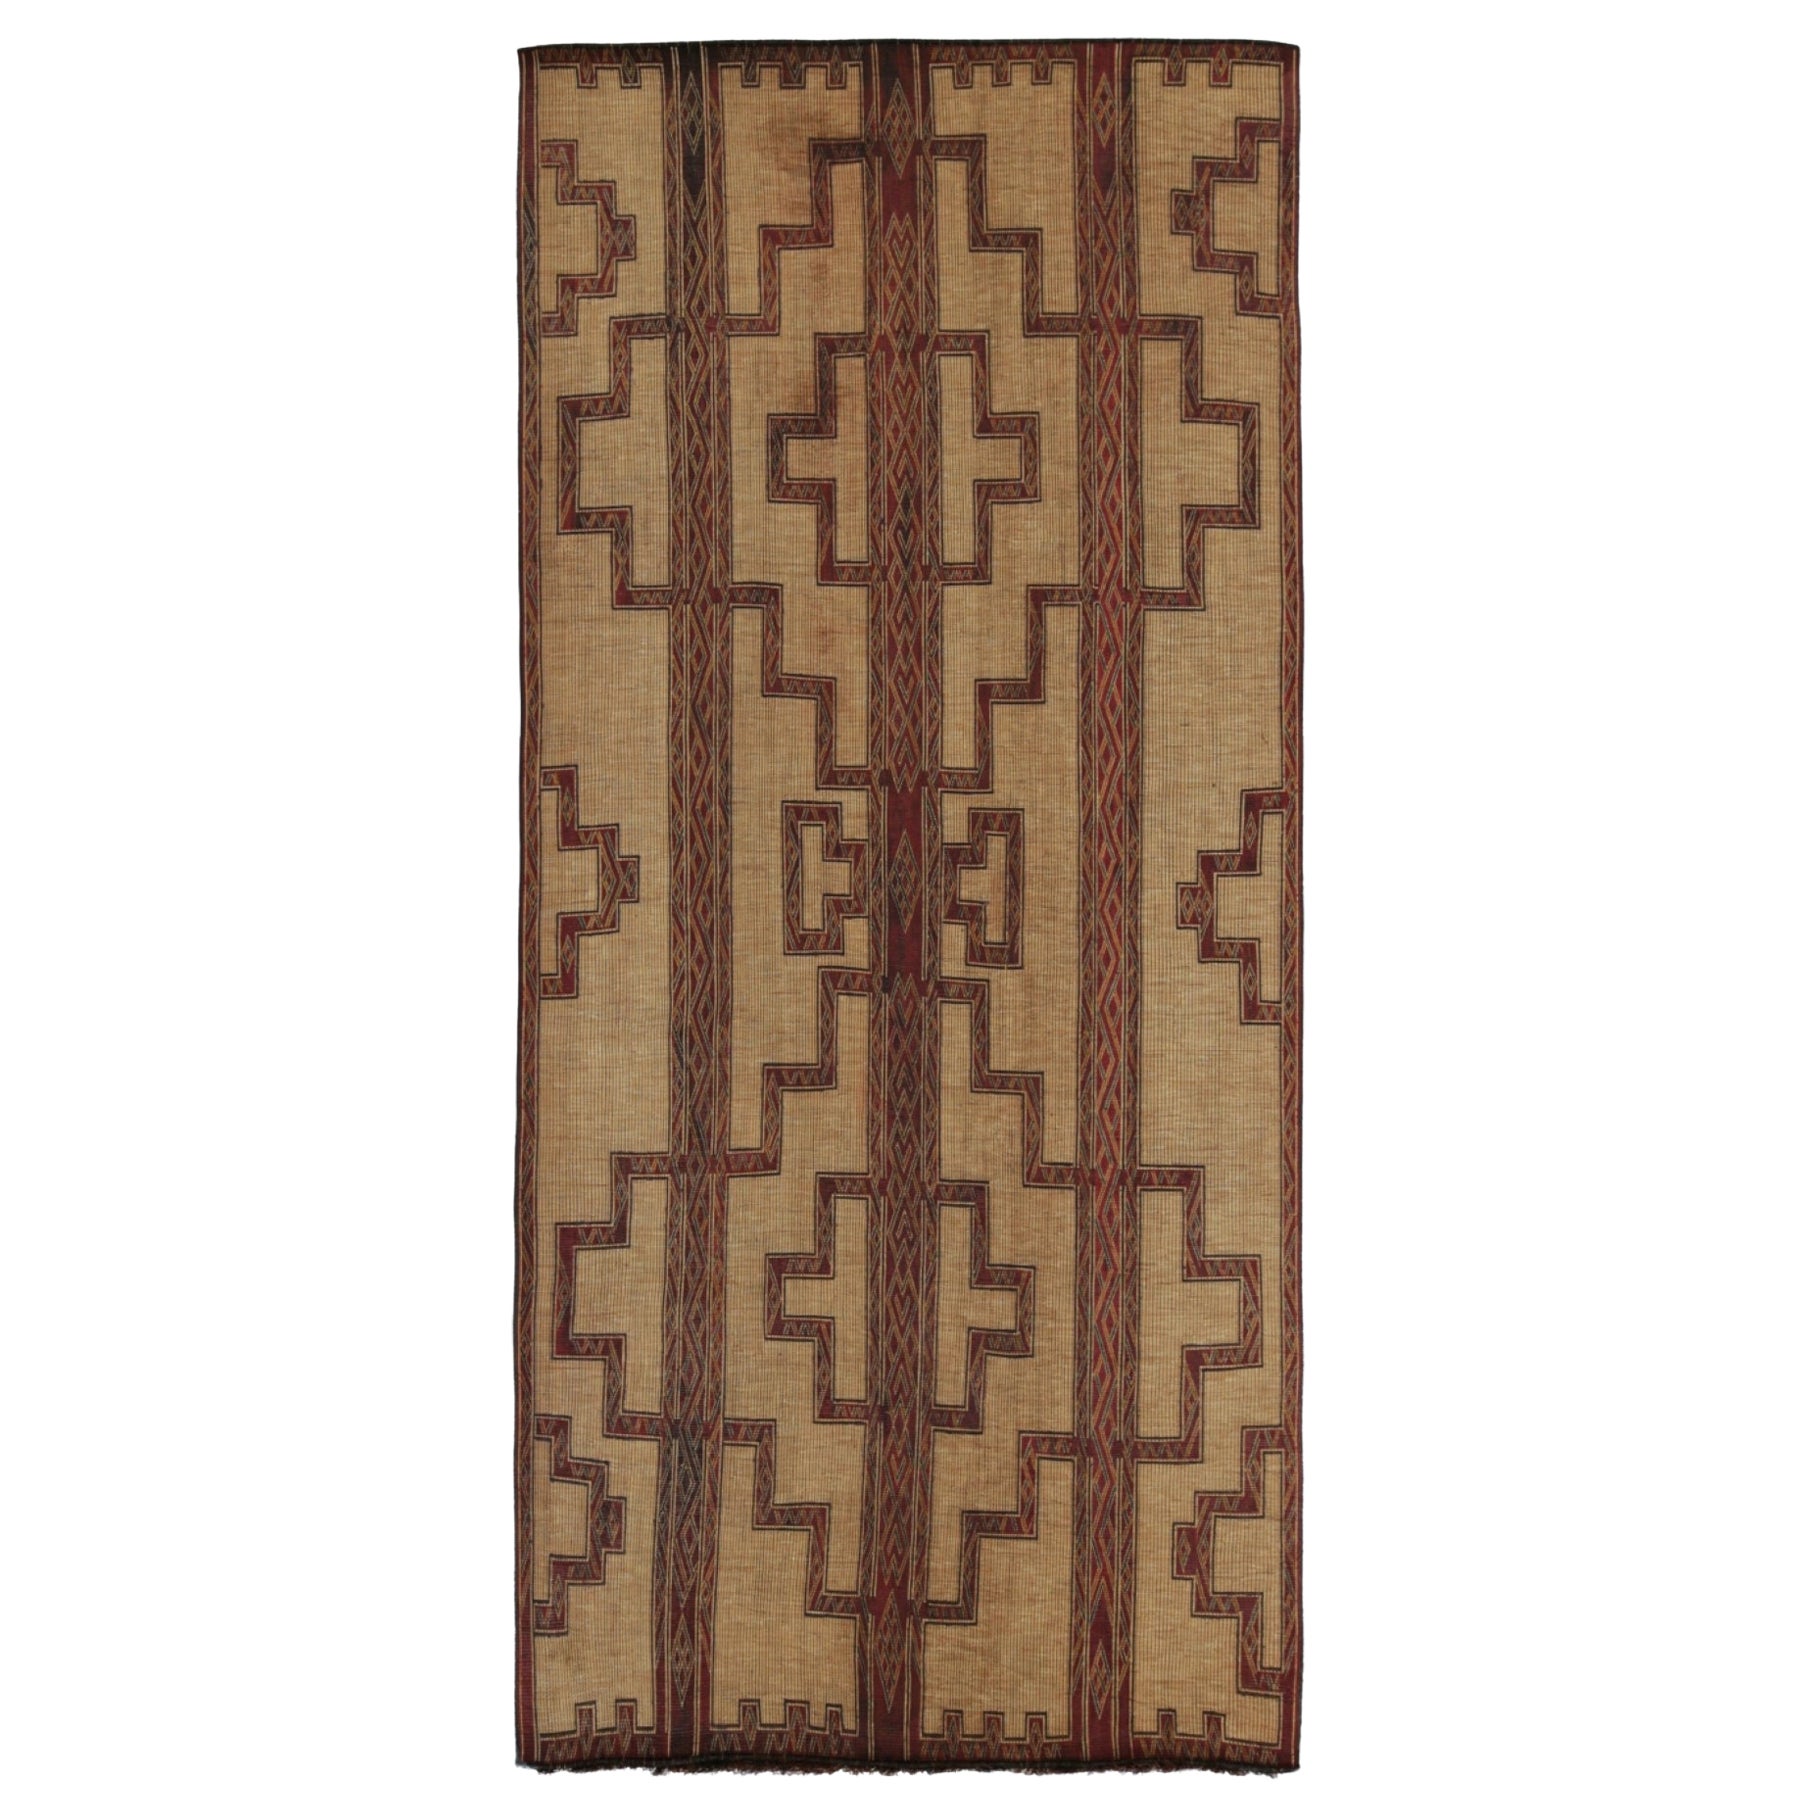 Vintage Moroccan Tuareg Mat in Beige with Geometric Patterns, from Rug & Kilim